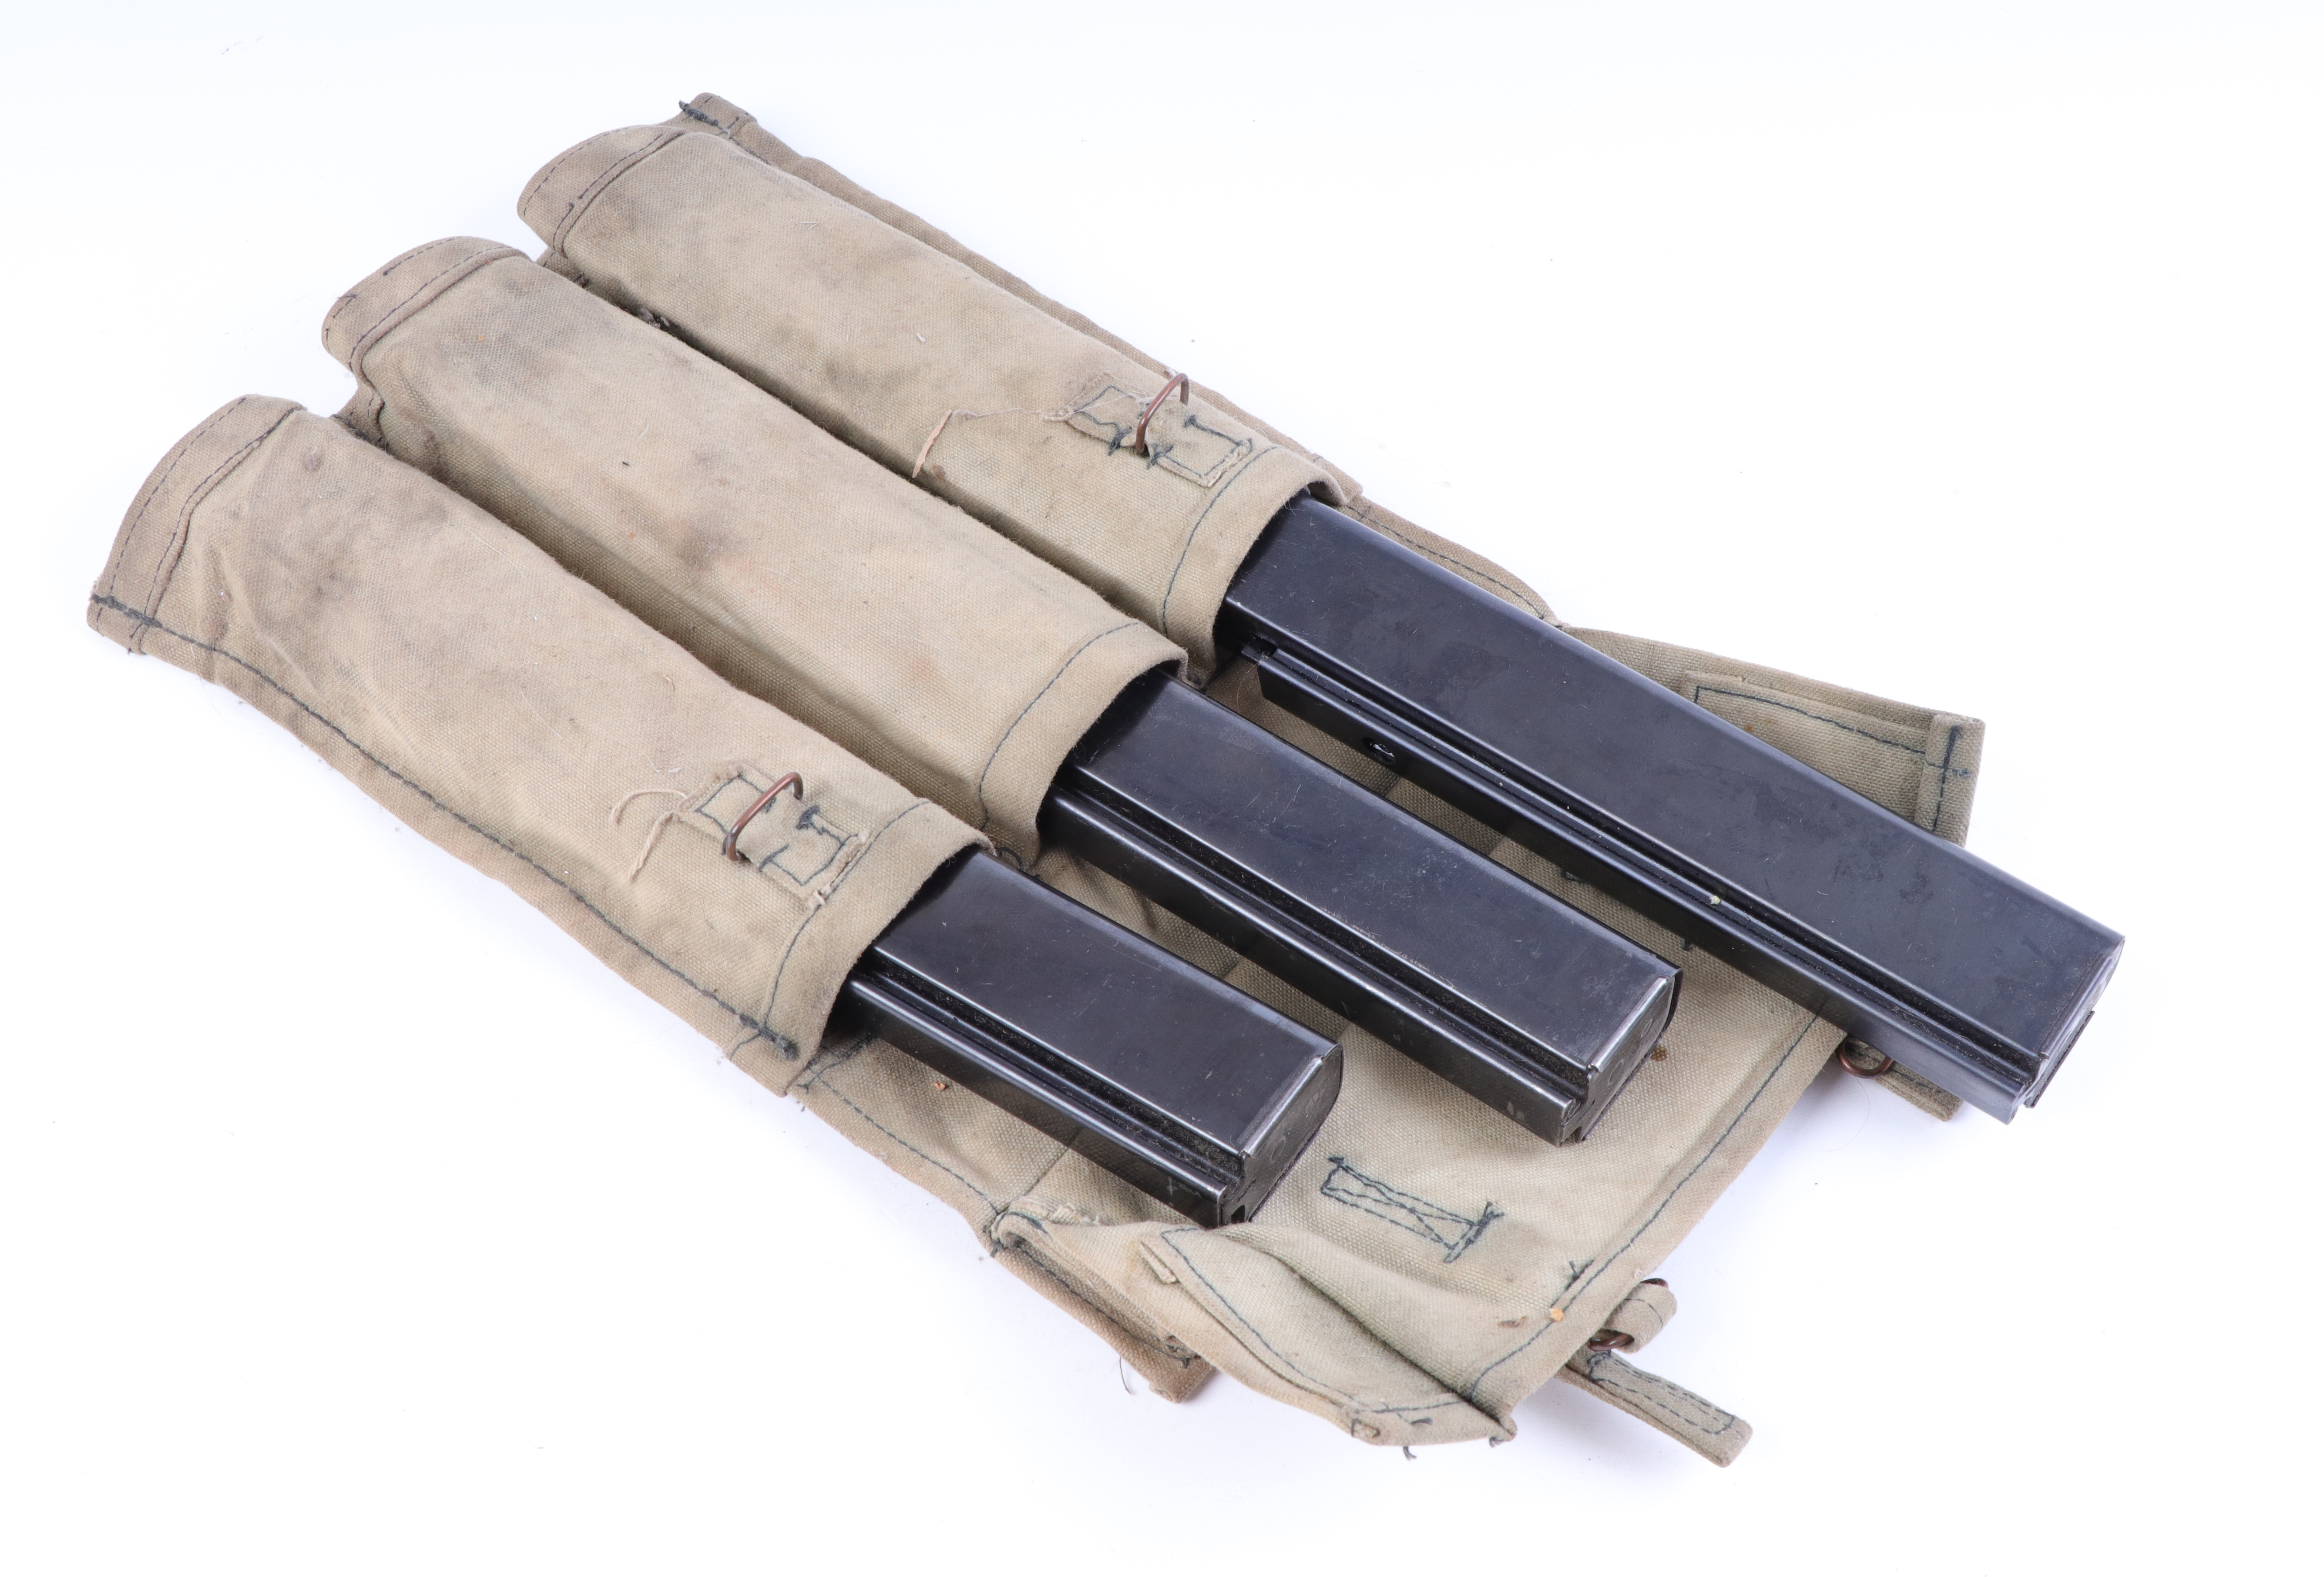 Three thompson stick magazines in military pouch